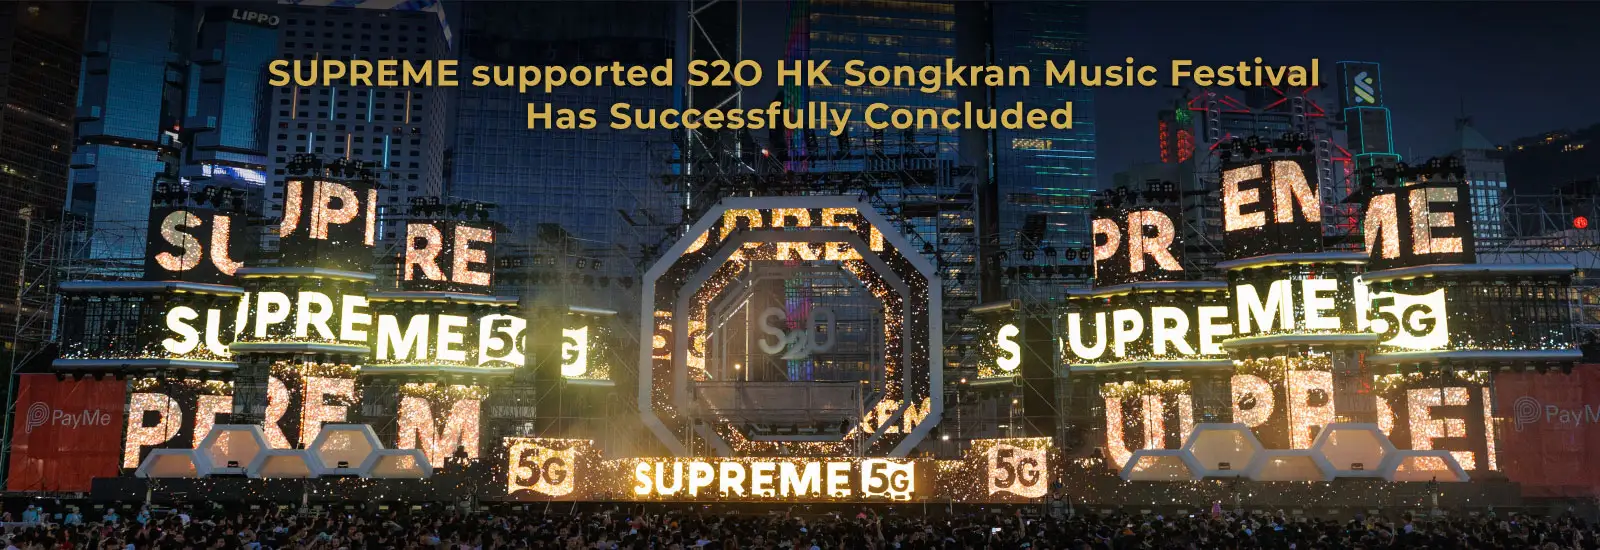 SUPREME-supported S2O Hong Kong Songkran Music Festival Has Successfully Concluded